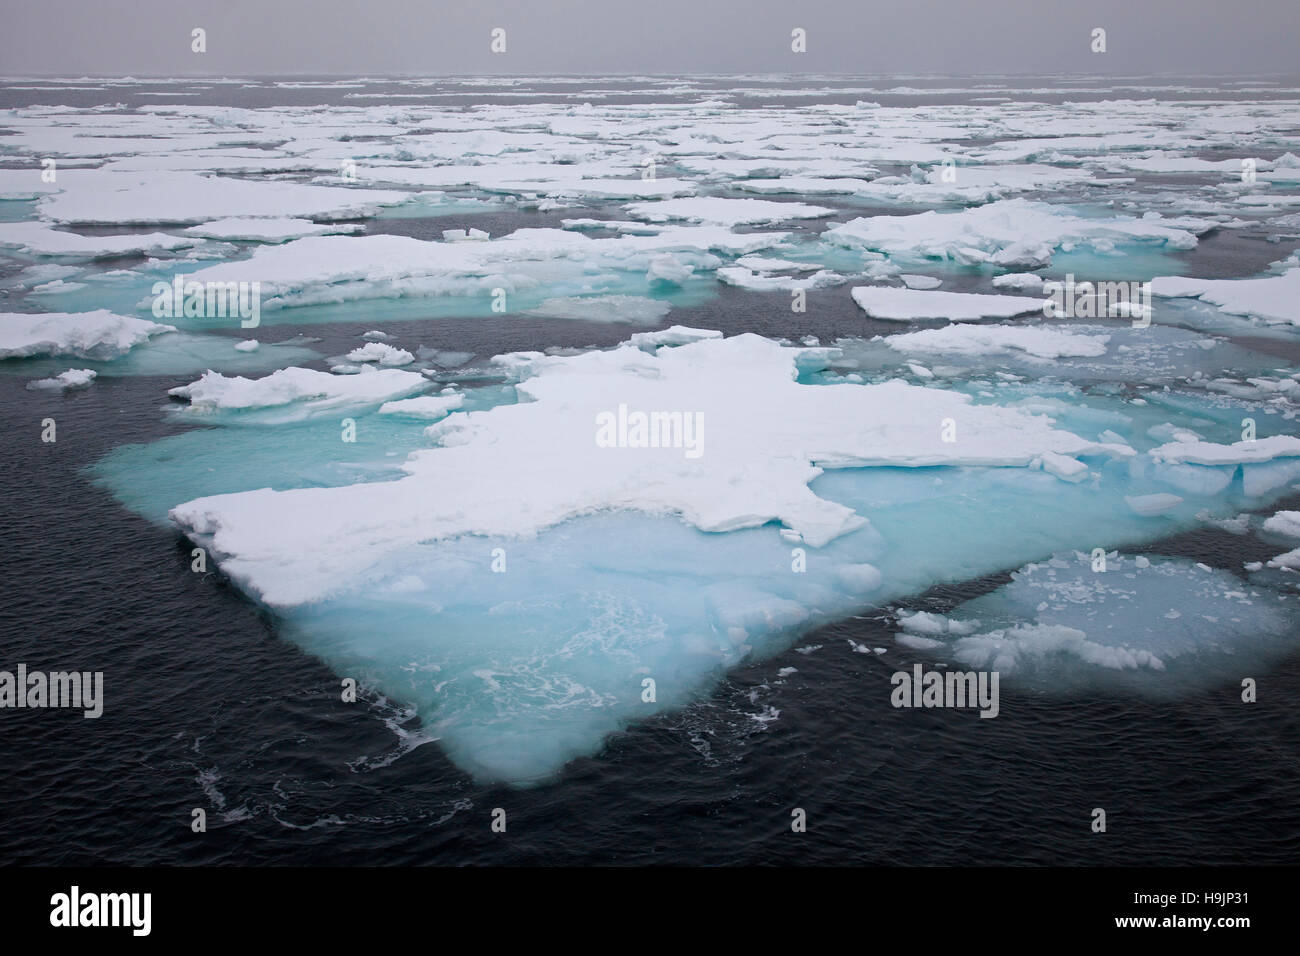 Pack ice / drift ice / ice floes drifting in the Greenland Sea Stock Photo